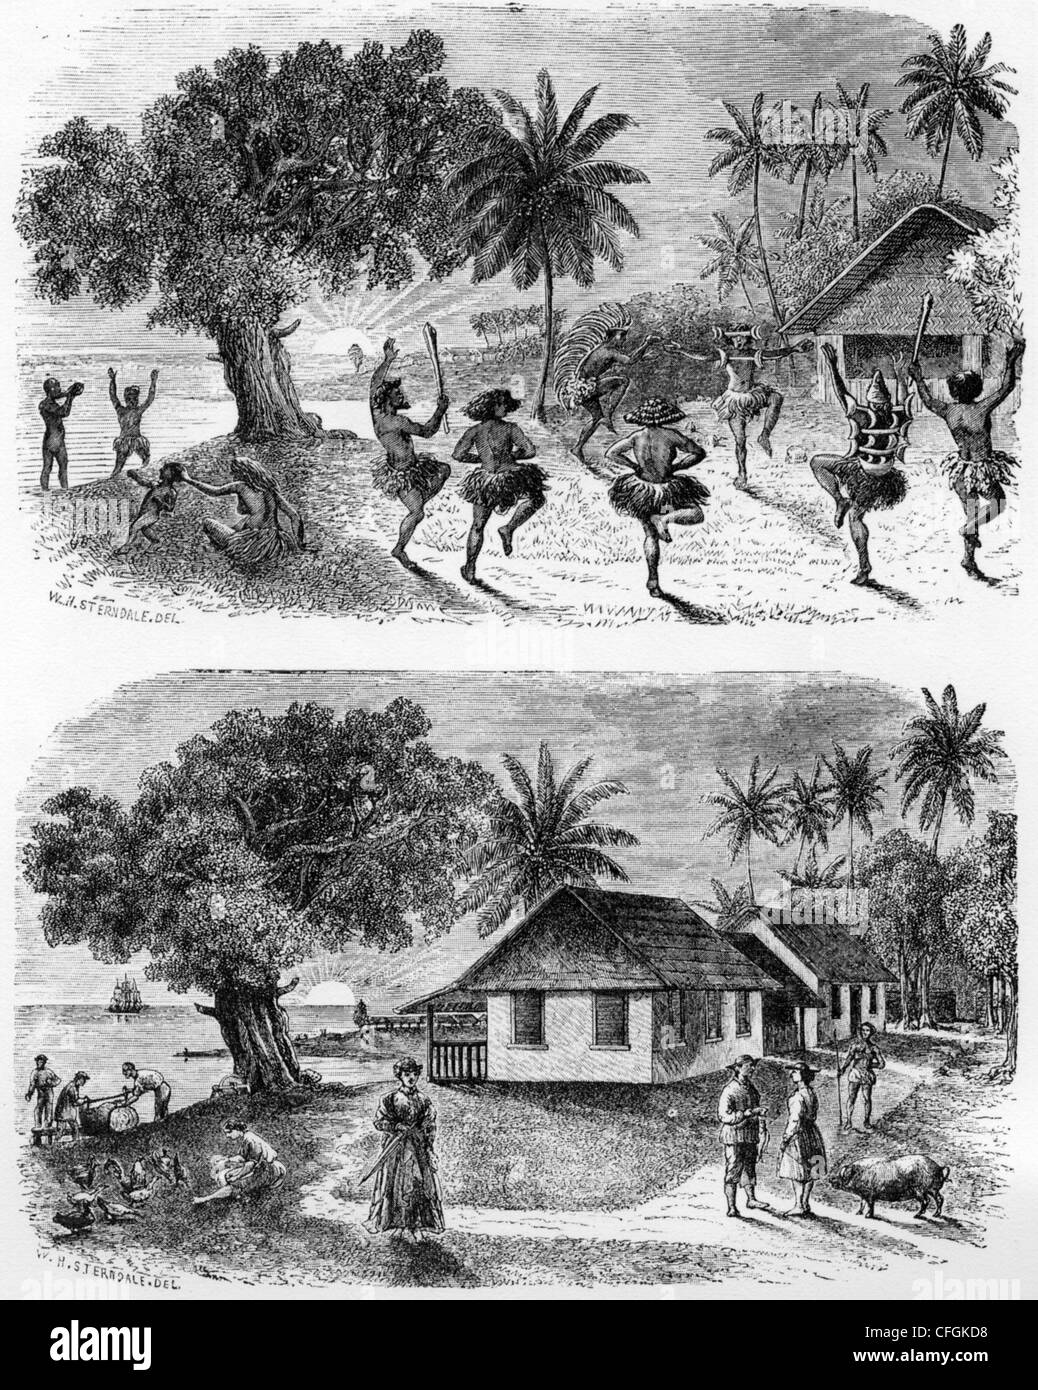 CHRISTIANITY transforms a village in the Cook Islands according to this 1870s illustration Stock Photo